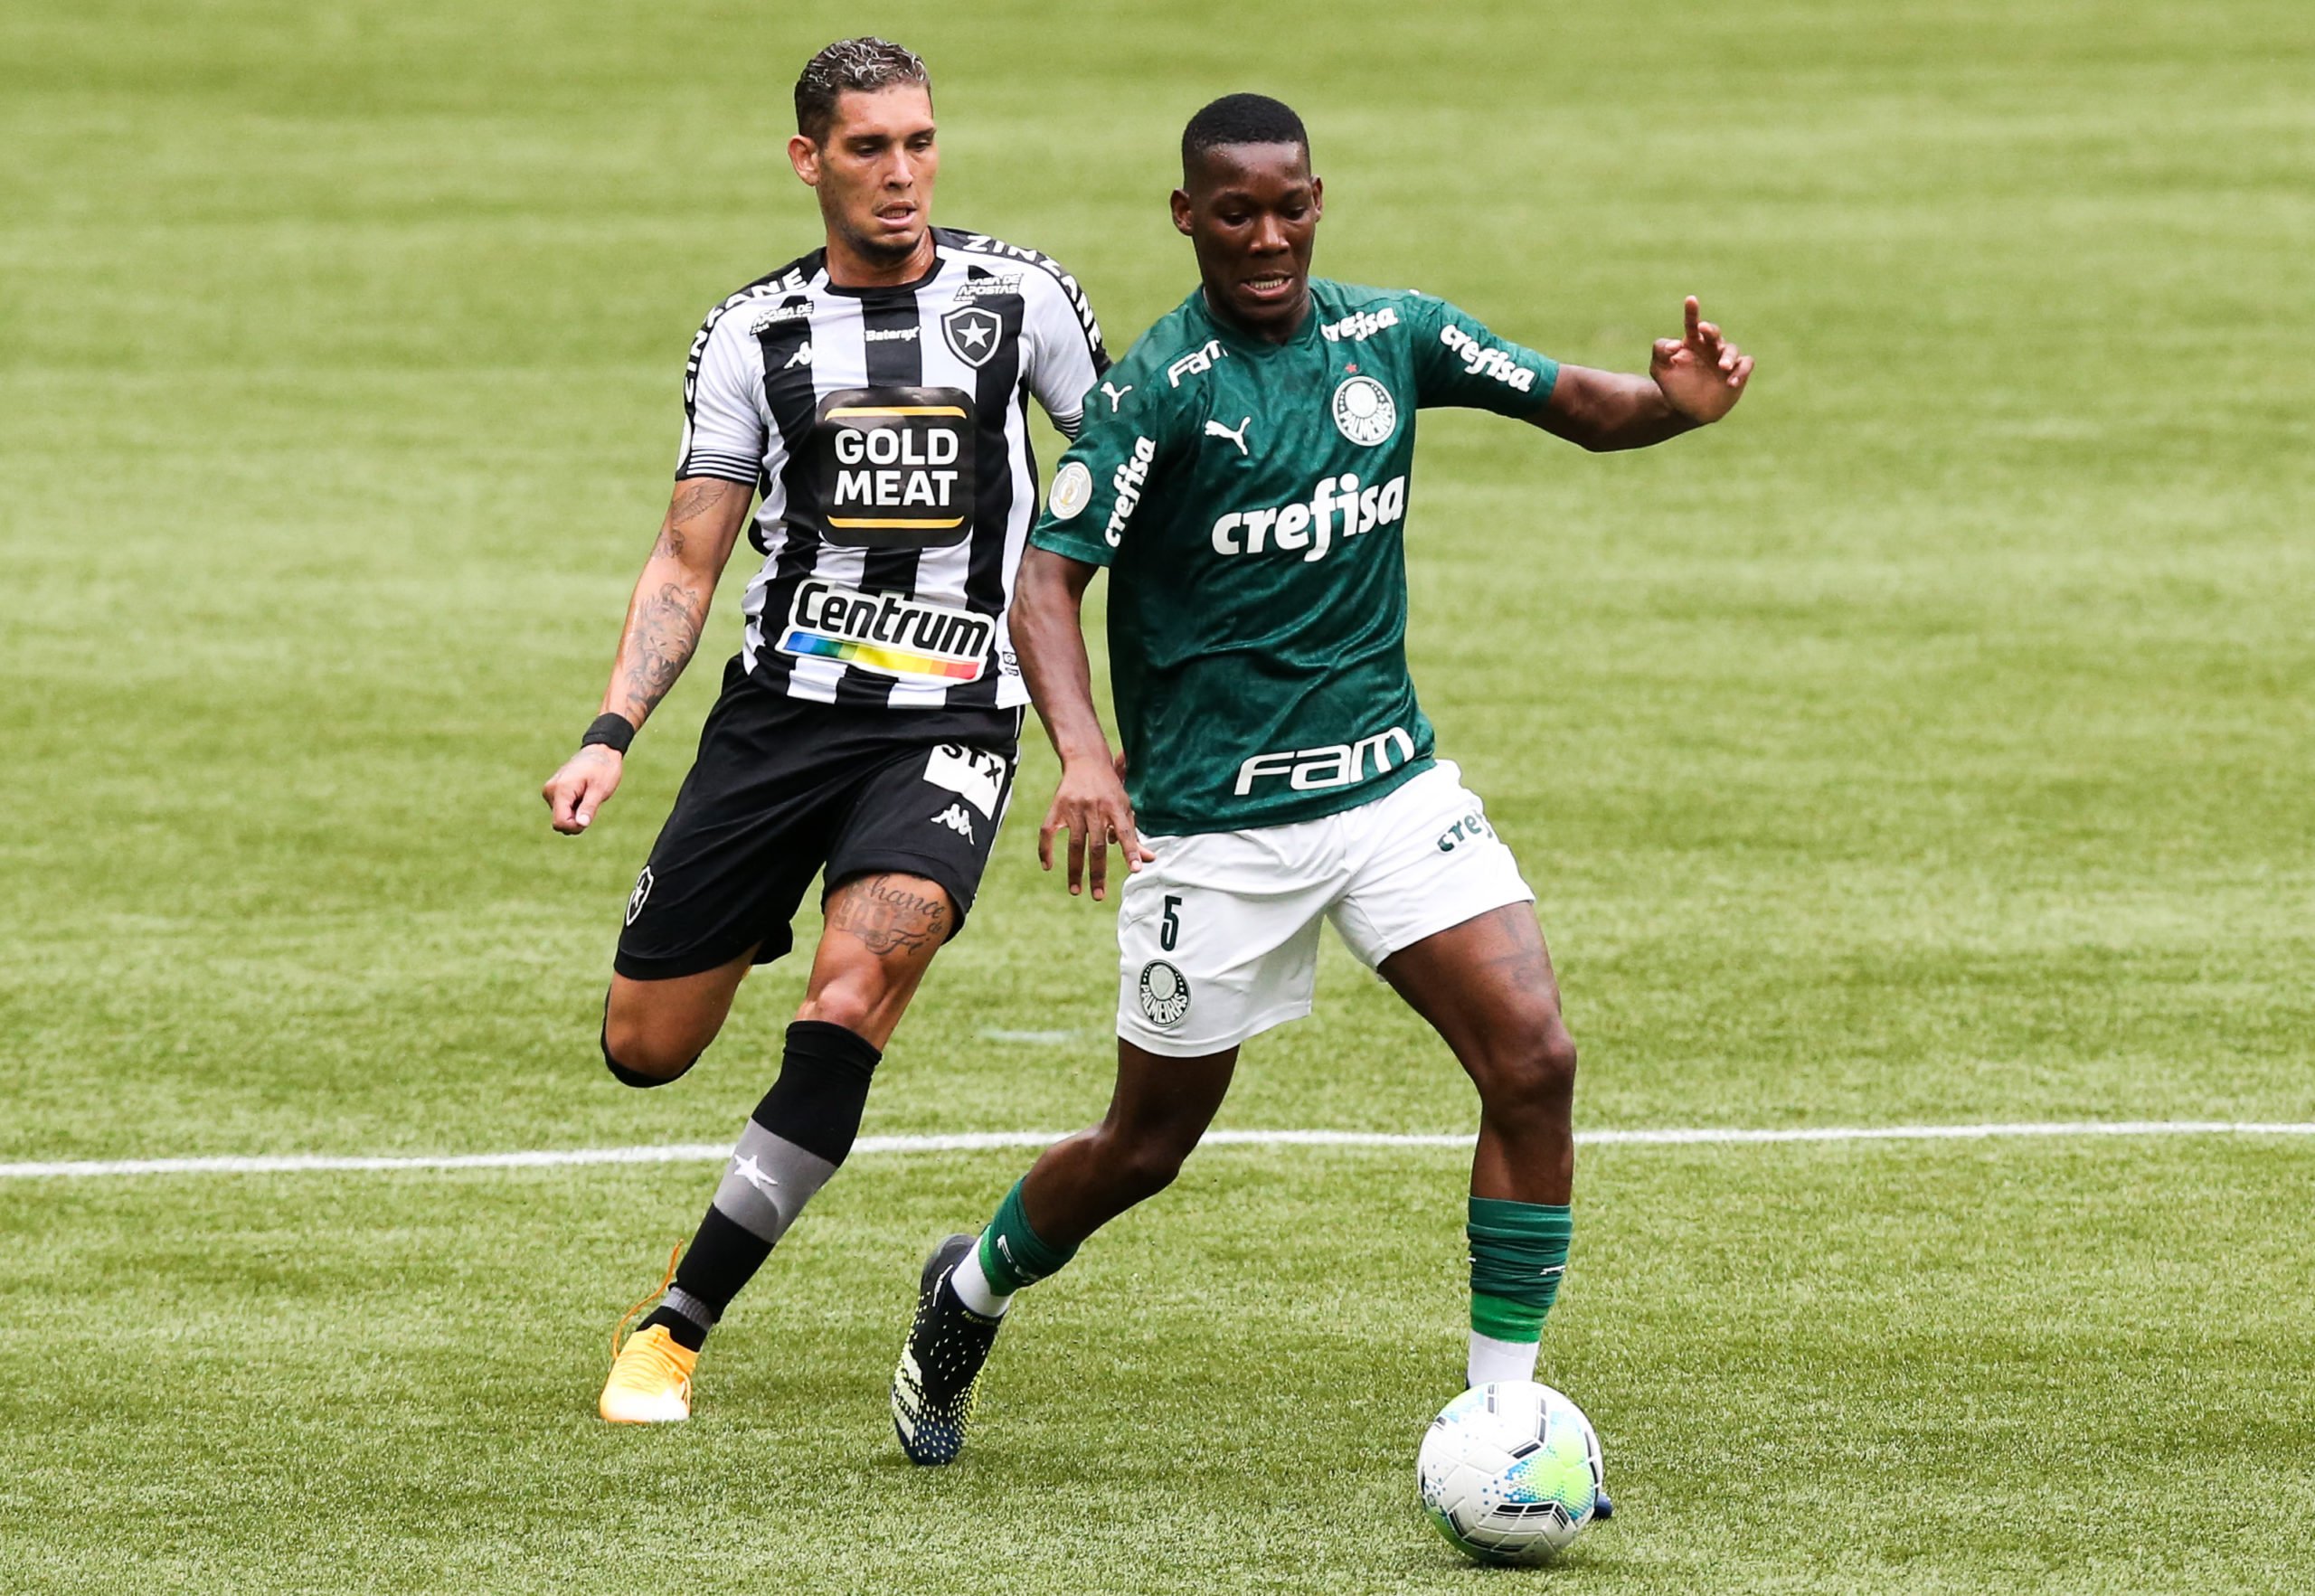 Manchester City keeping tabs on Patrick de Paula who is in action in the picture